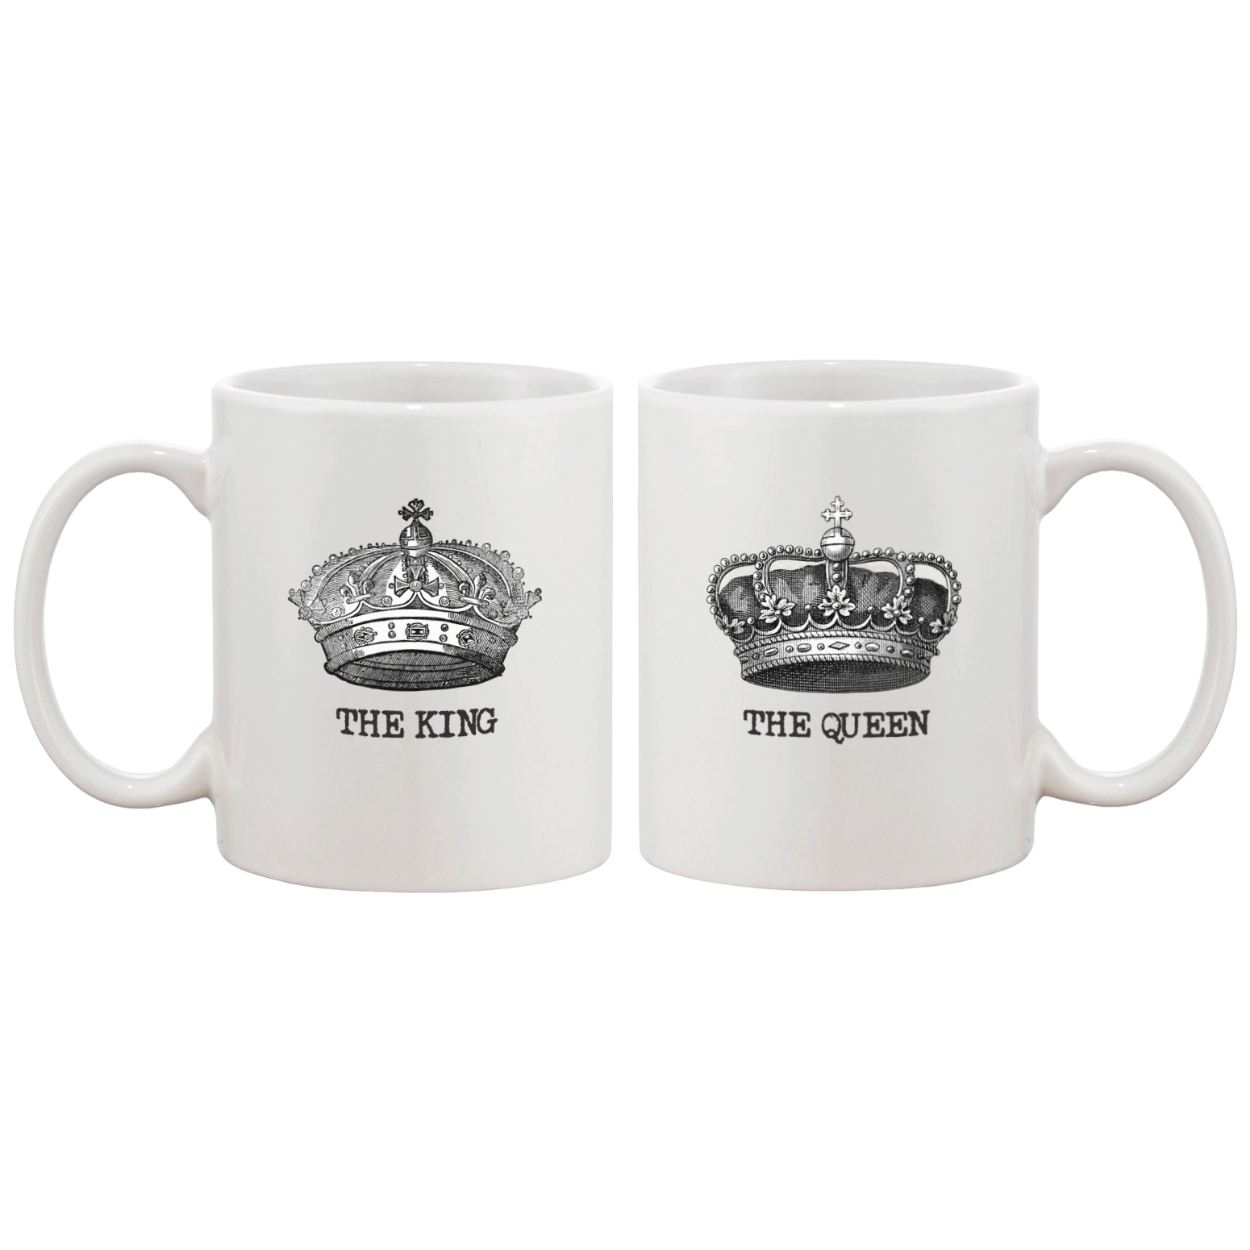 The King and Queen Couple Mugs - His and Hers Matching Coffee Mug Cup Gift White